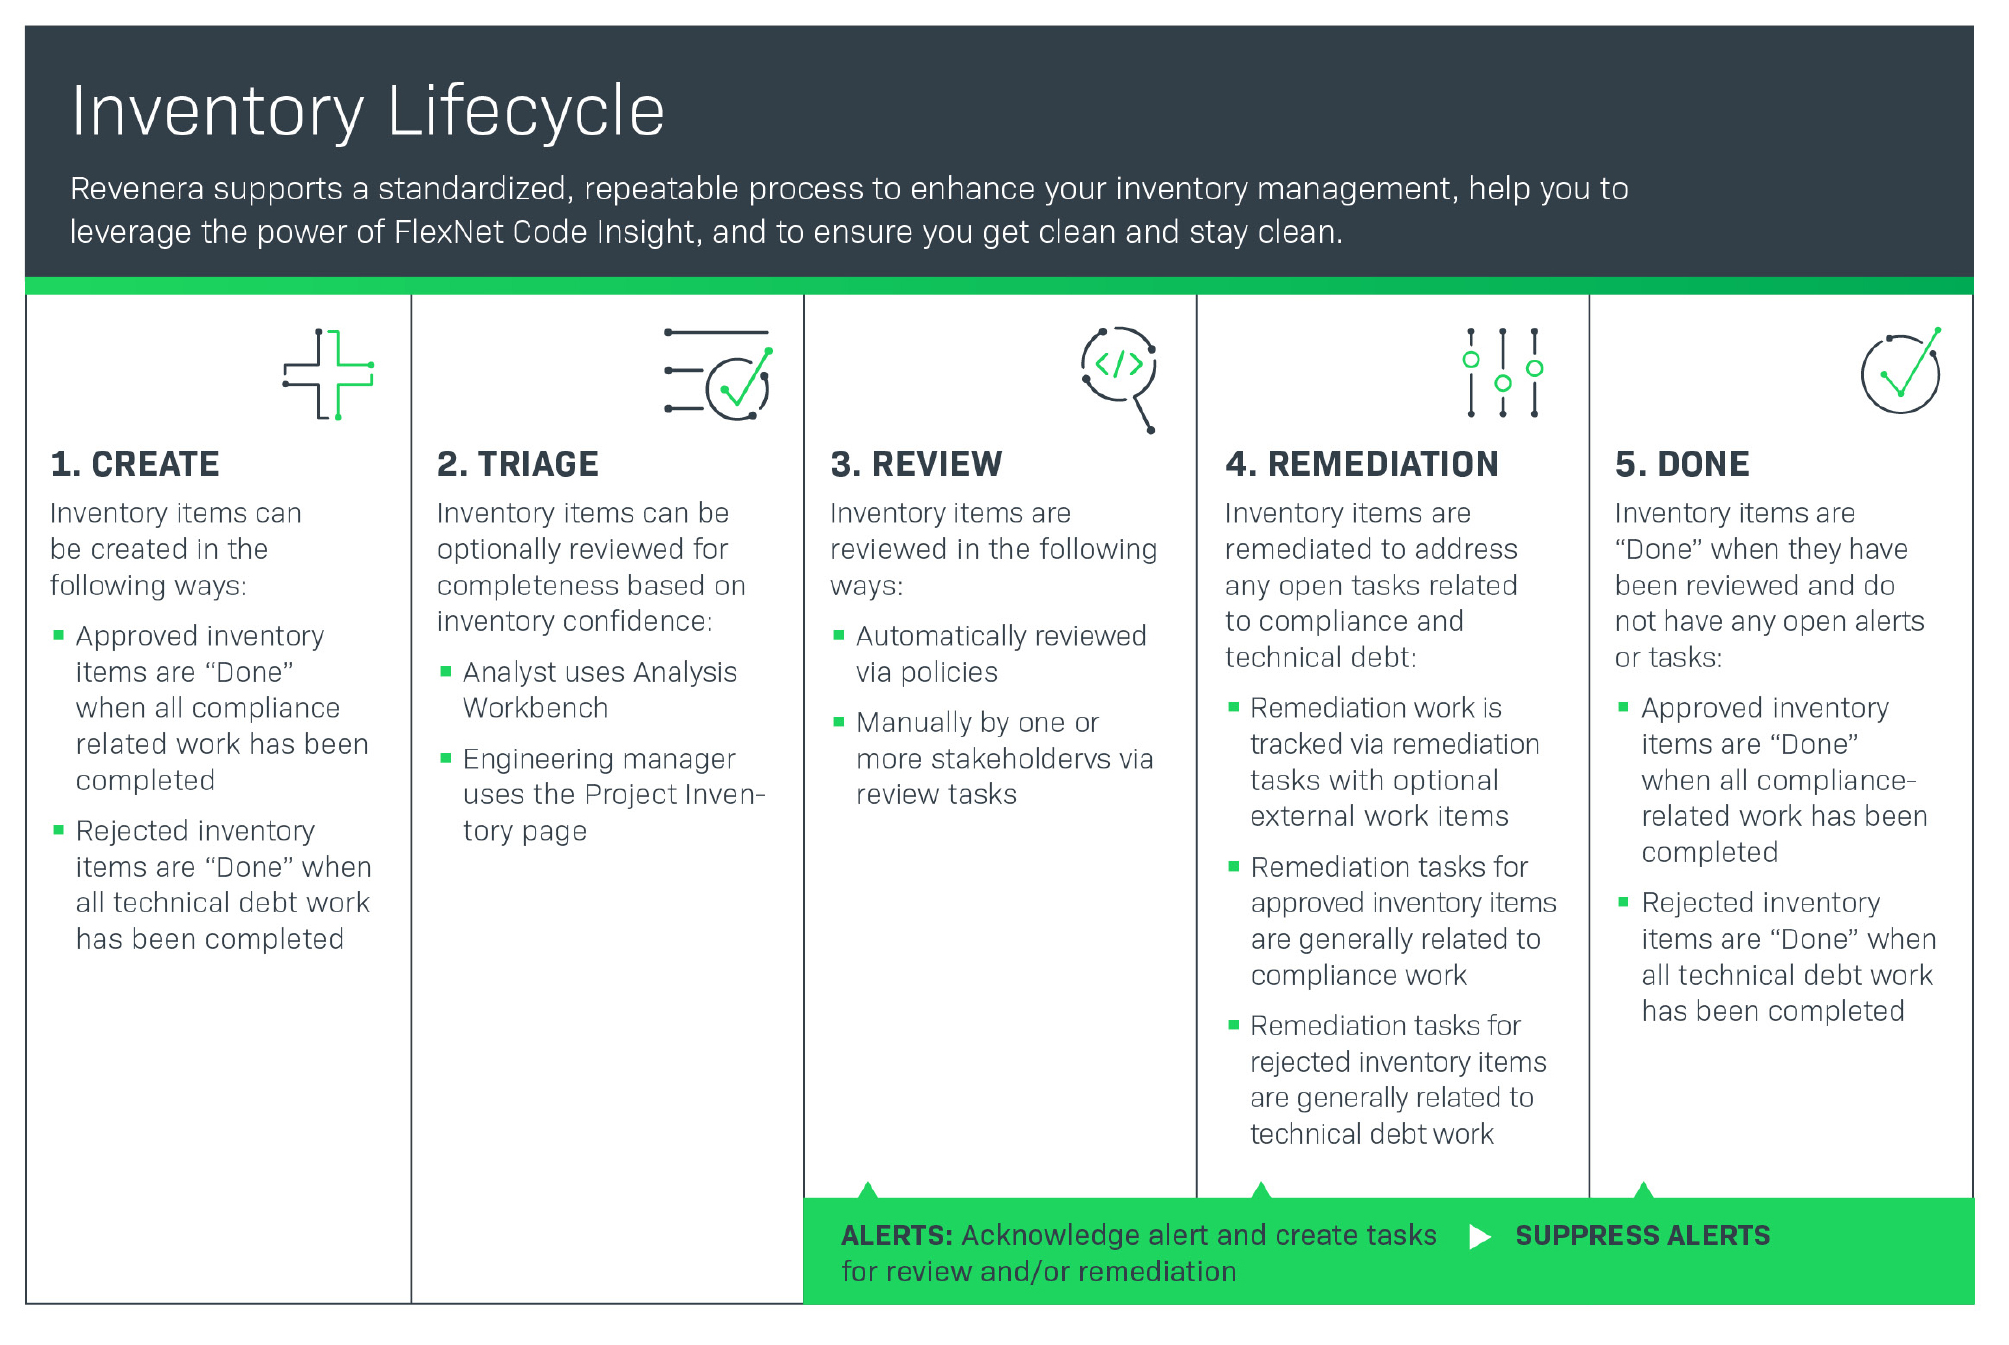 Inventory lifecycle